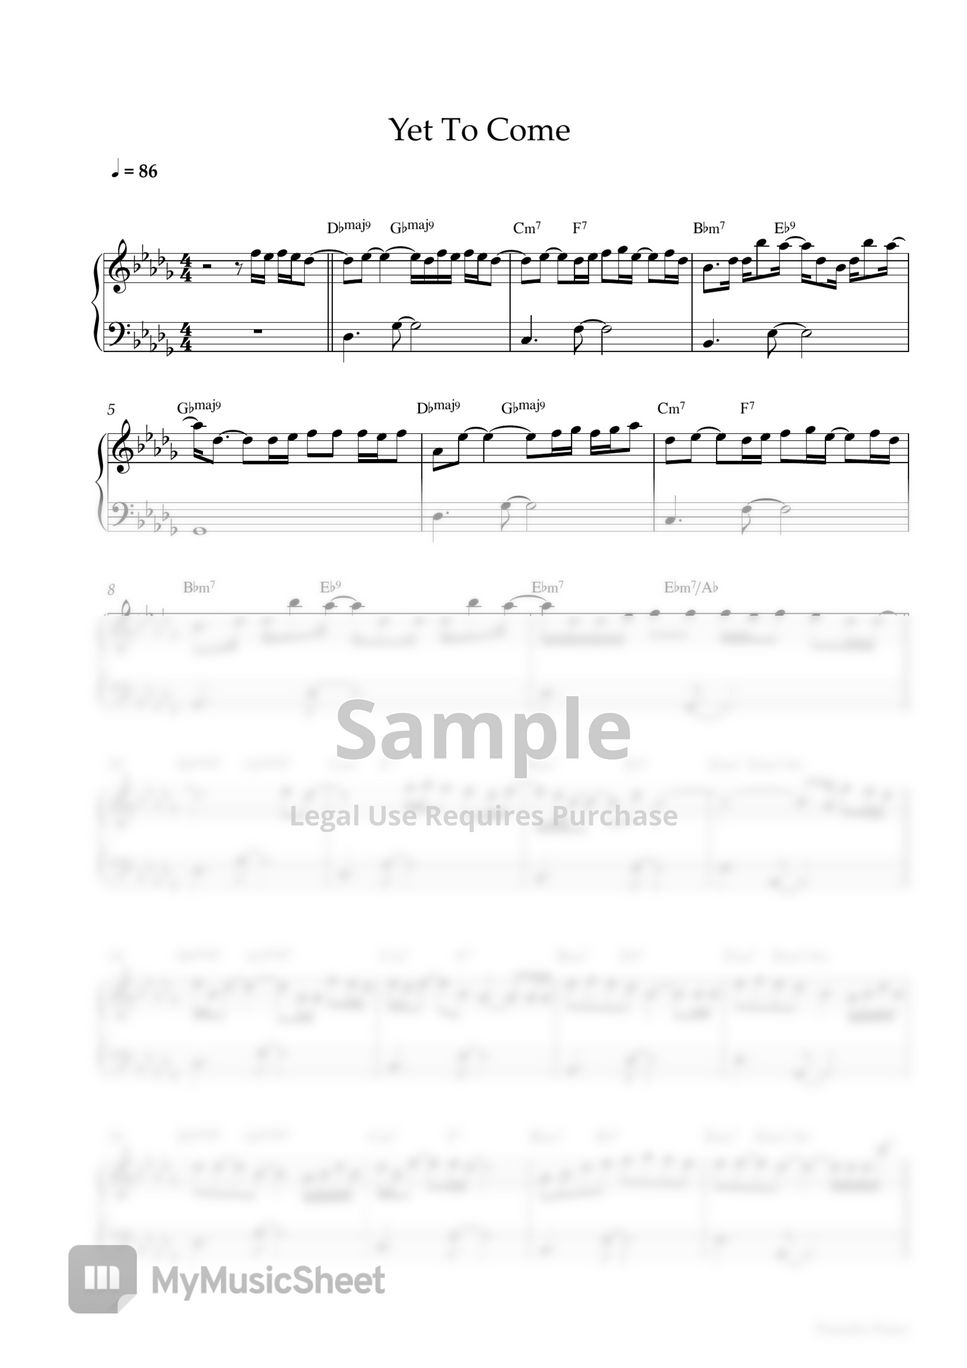 BTS - Yet To Come (EASY Piano Sheet) Sheets by Pianella